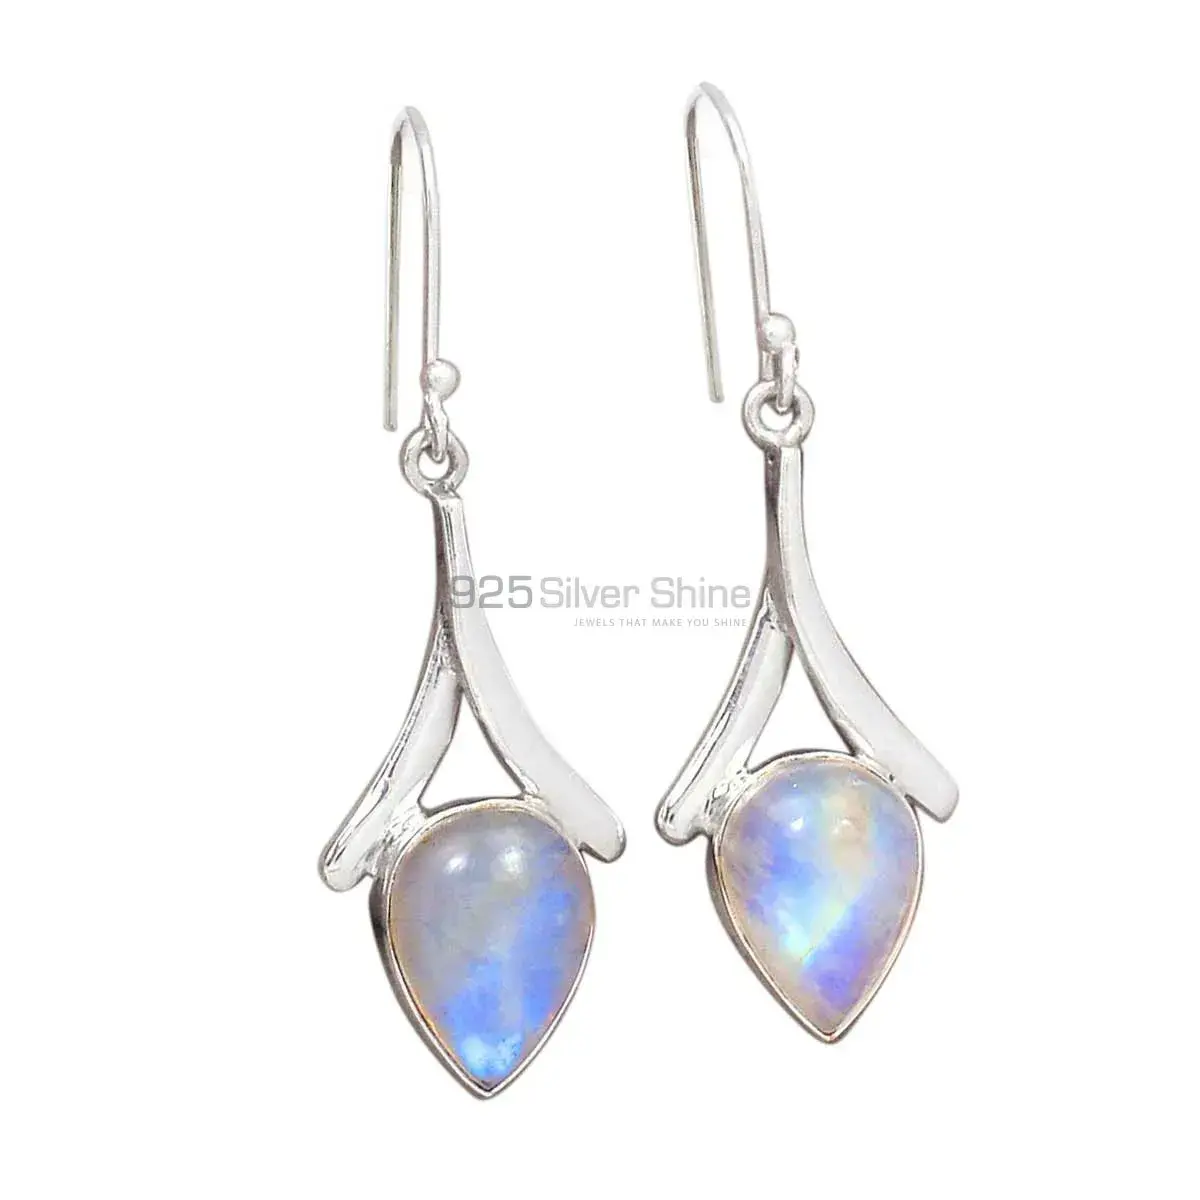 Solid 925 Sterling Silver Earrings Suppliers |Rainbow Moonstone Jewelry|